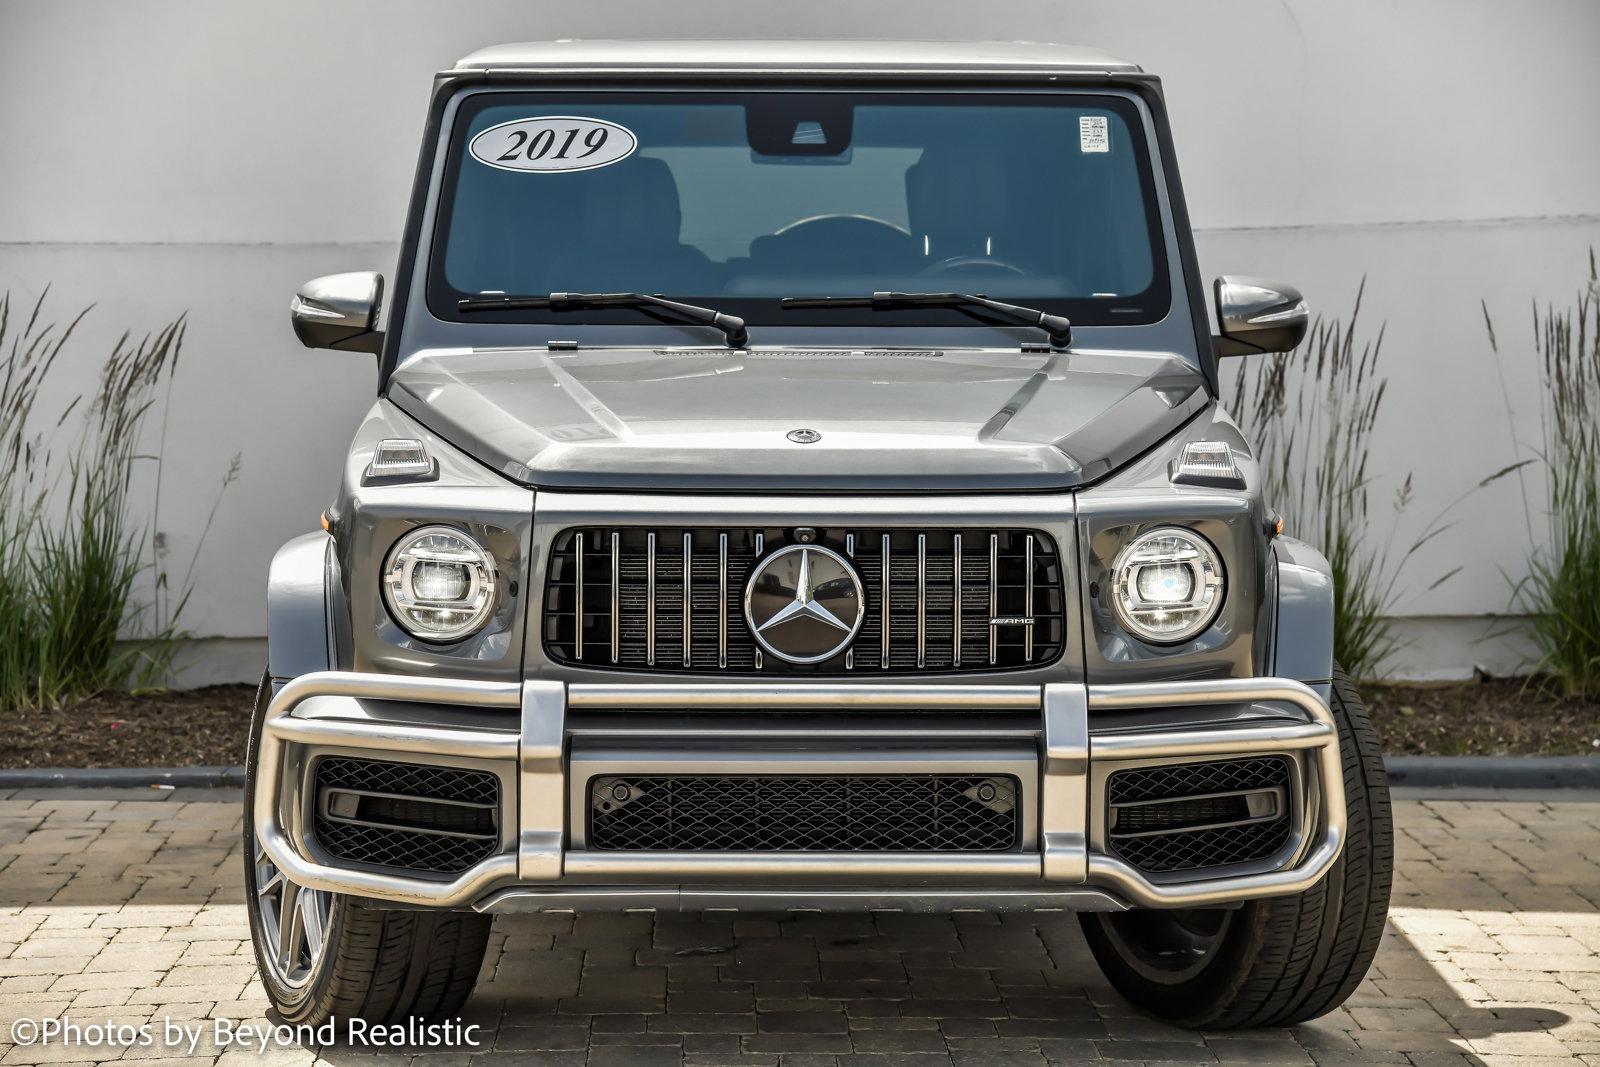 Used 2019 Mercedes-Benz G-Class AMG G 63, Exclusive Pkg | Downers Grove, IL